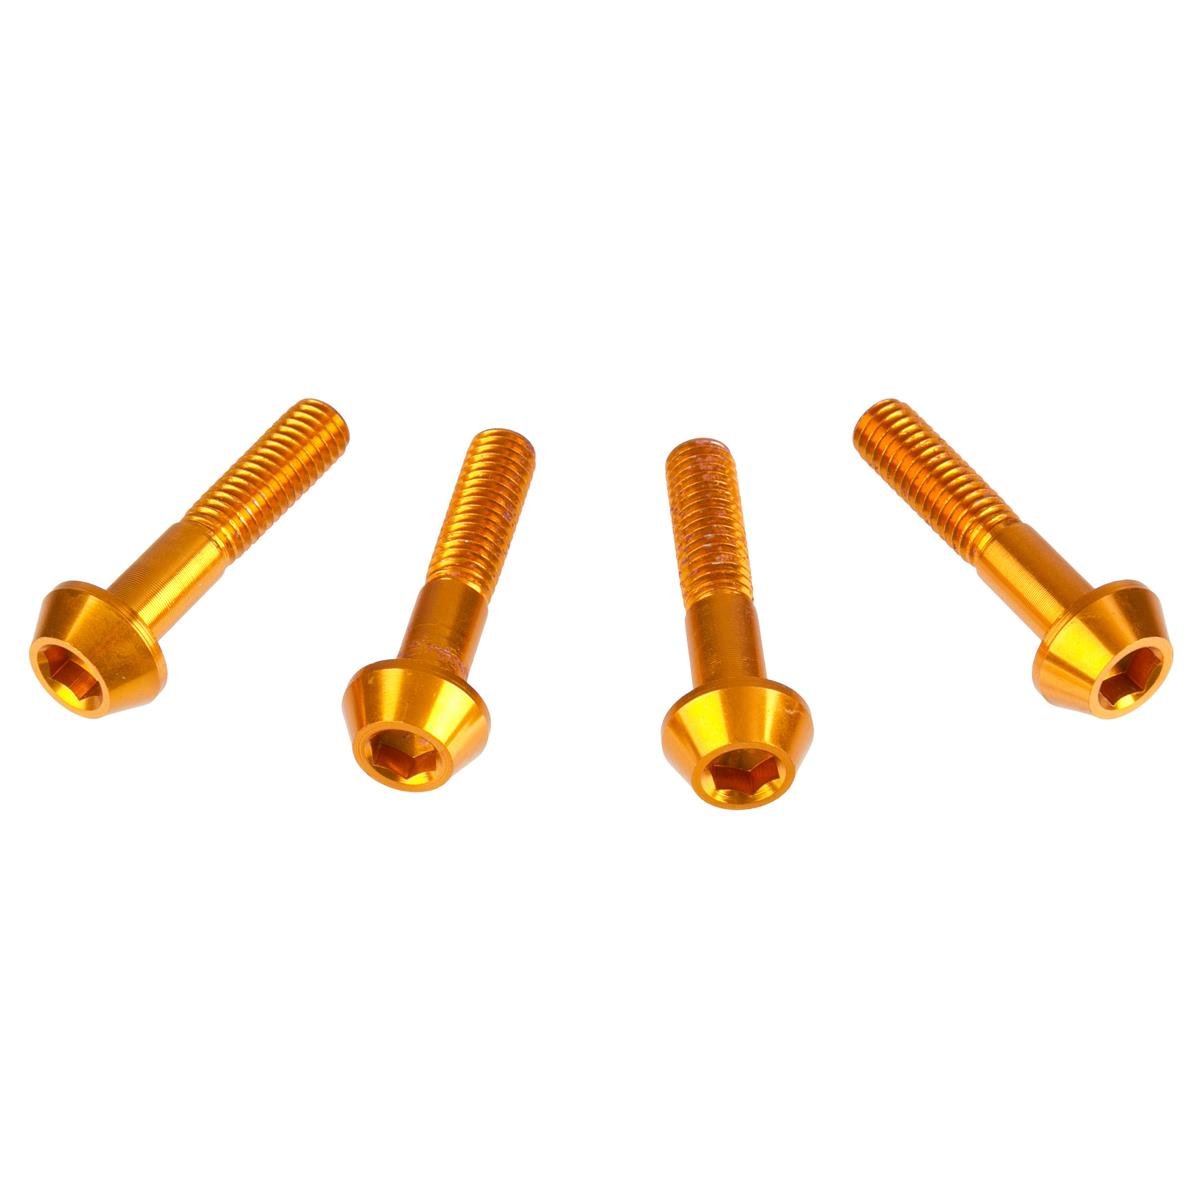 DRC Inner Hex Bolts  M6 x 30 mm, Gold, Pack of 4